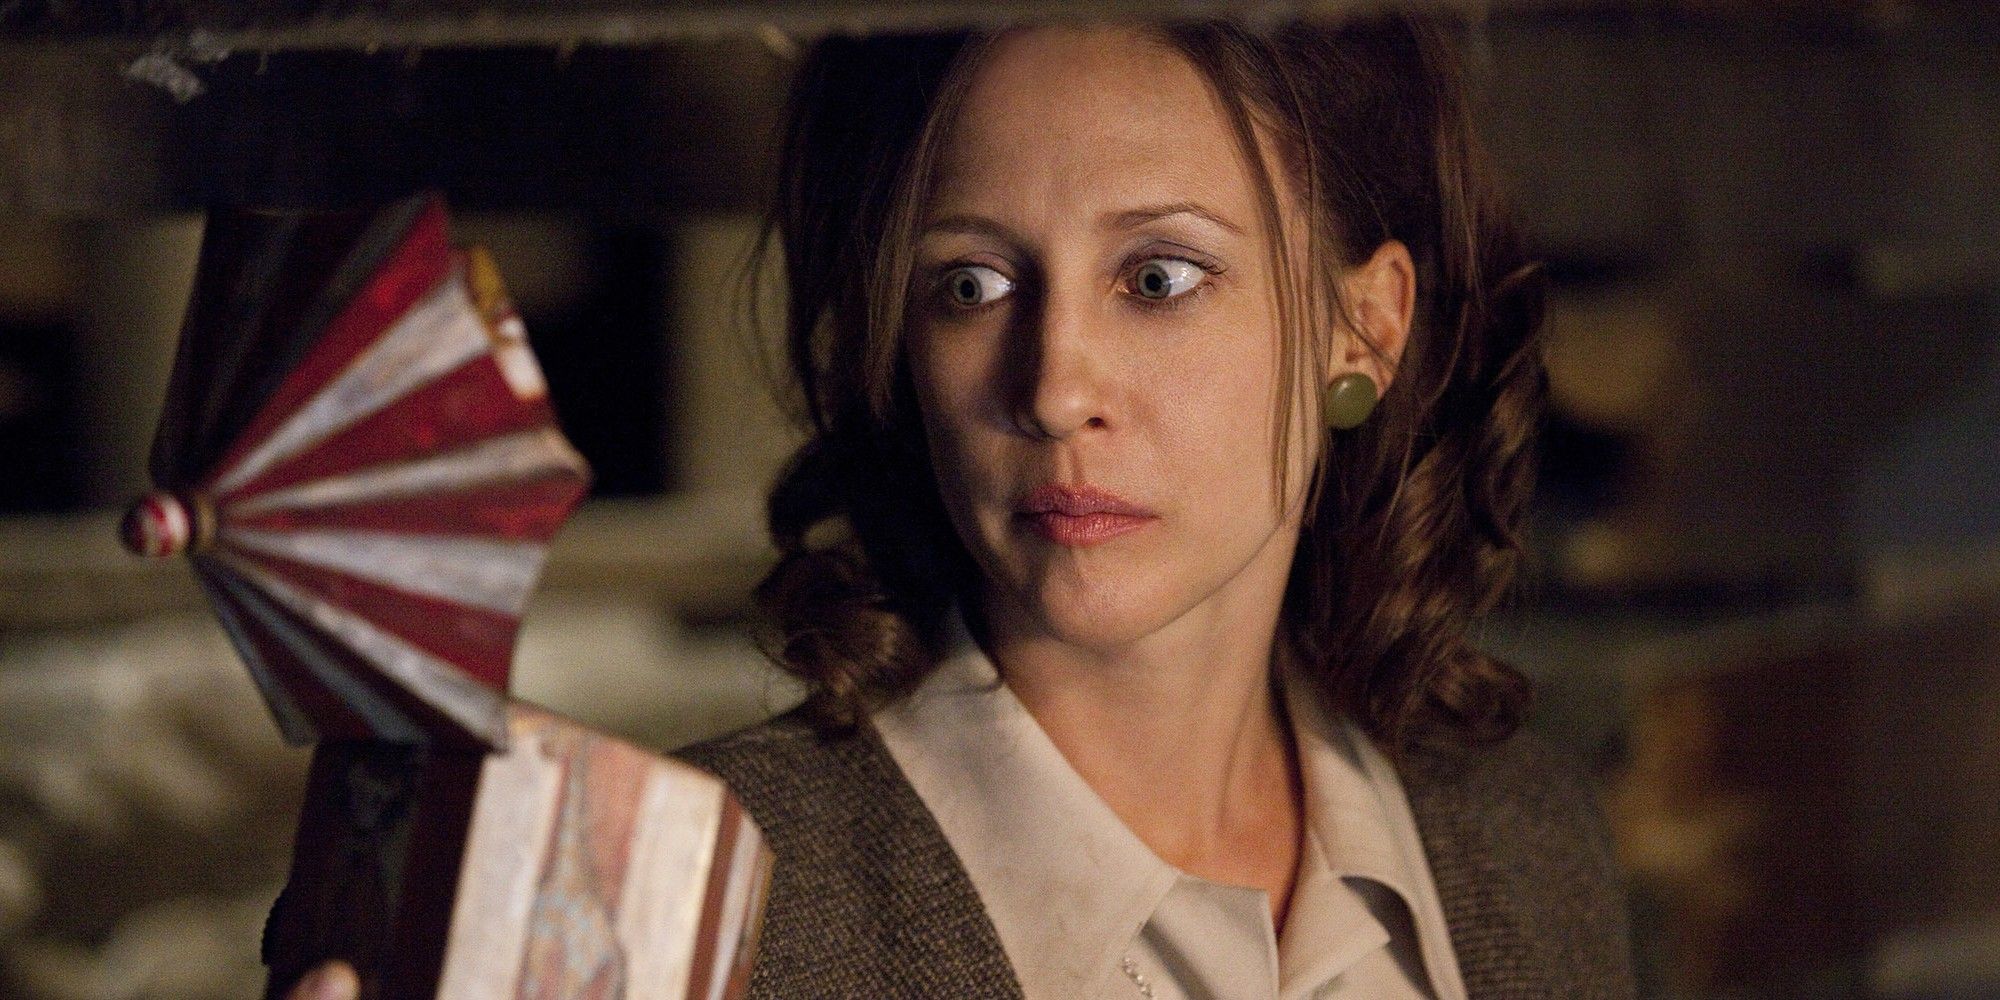 Lorraine holds a music box in The Conjuring (2013).